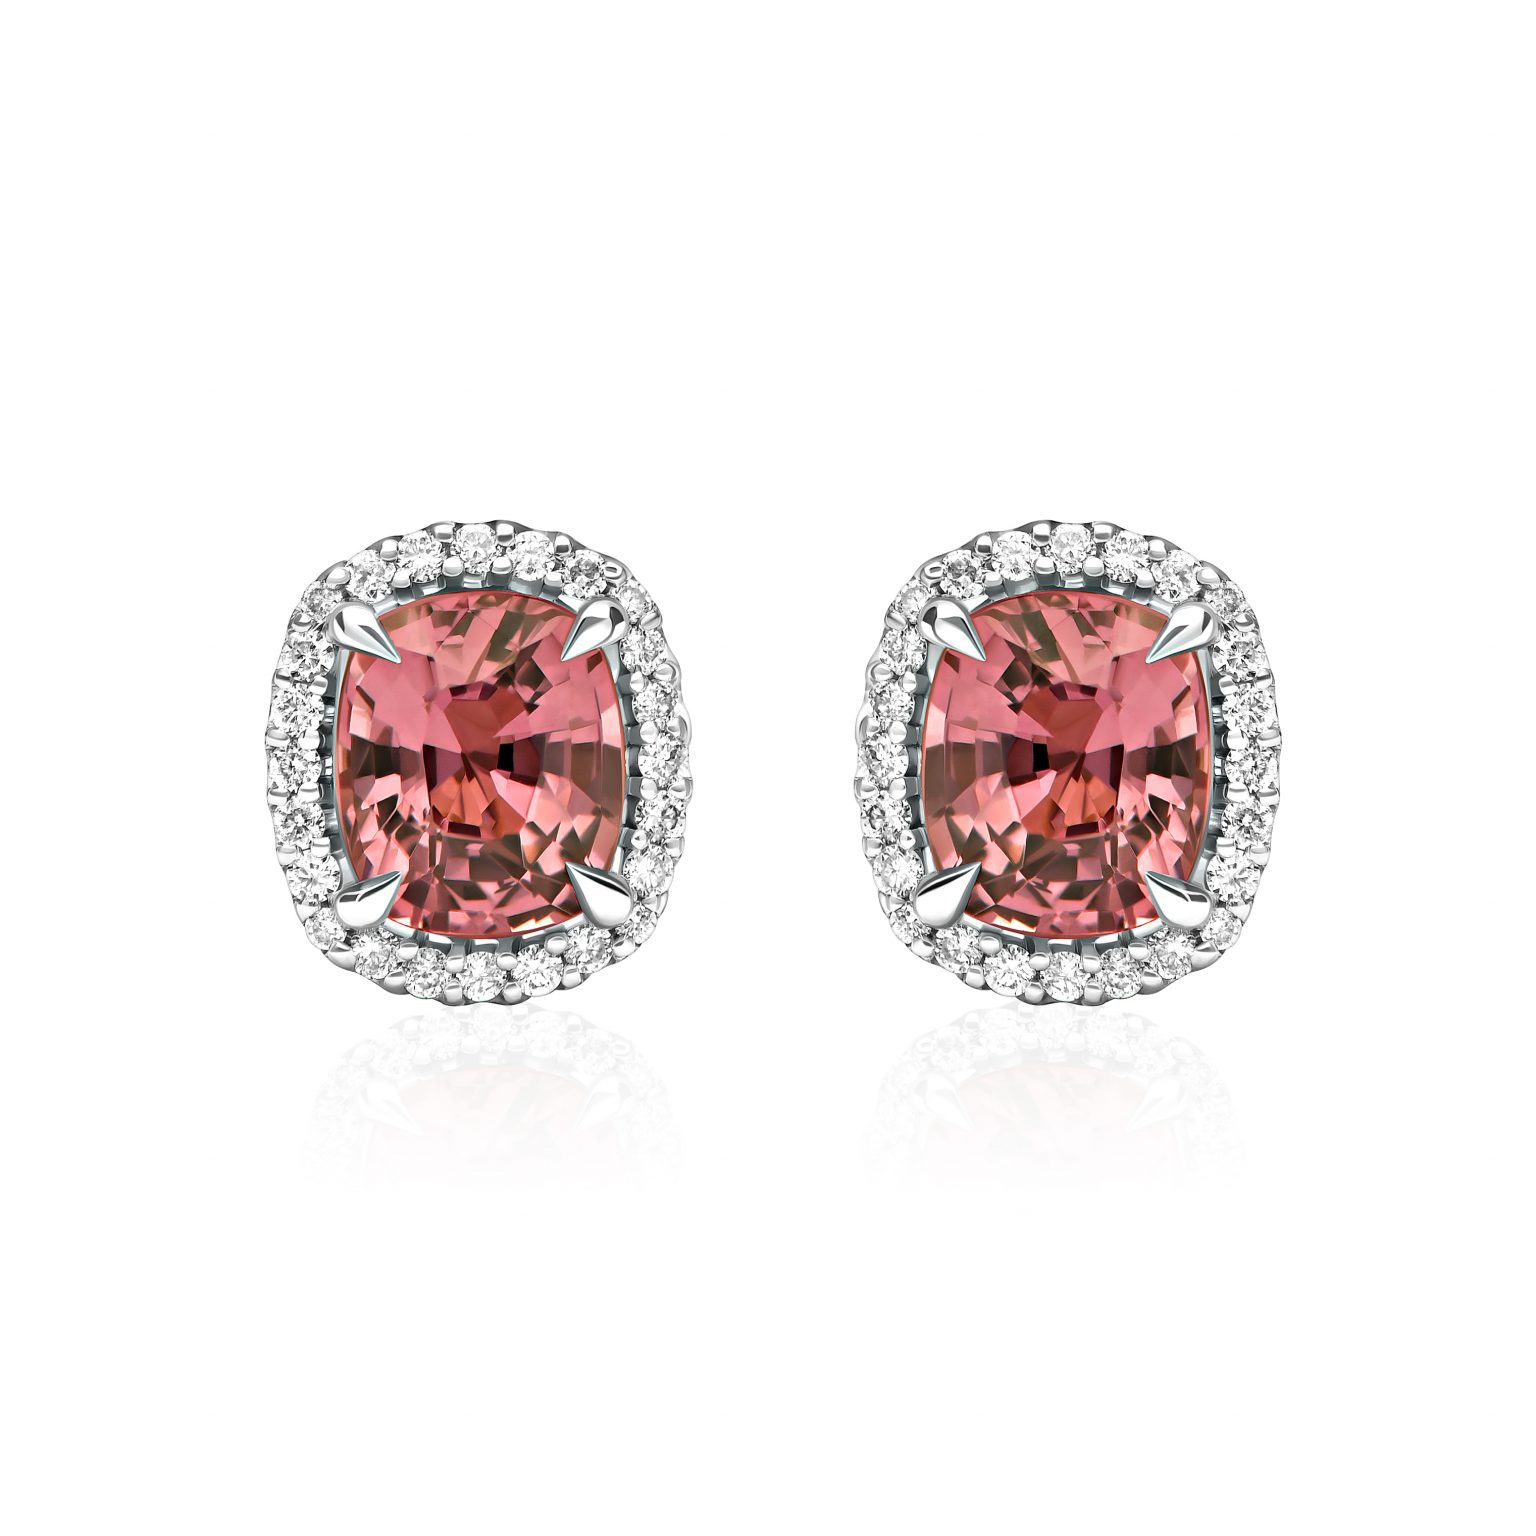 Spinel stud earrings with a total weight of 2.16 ct